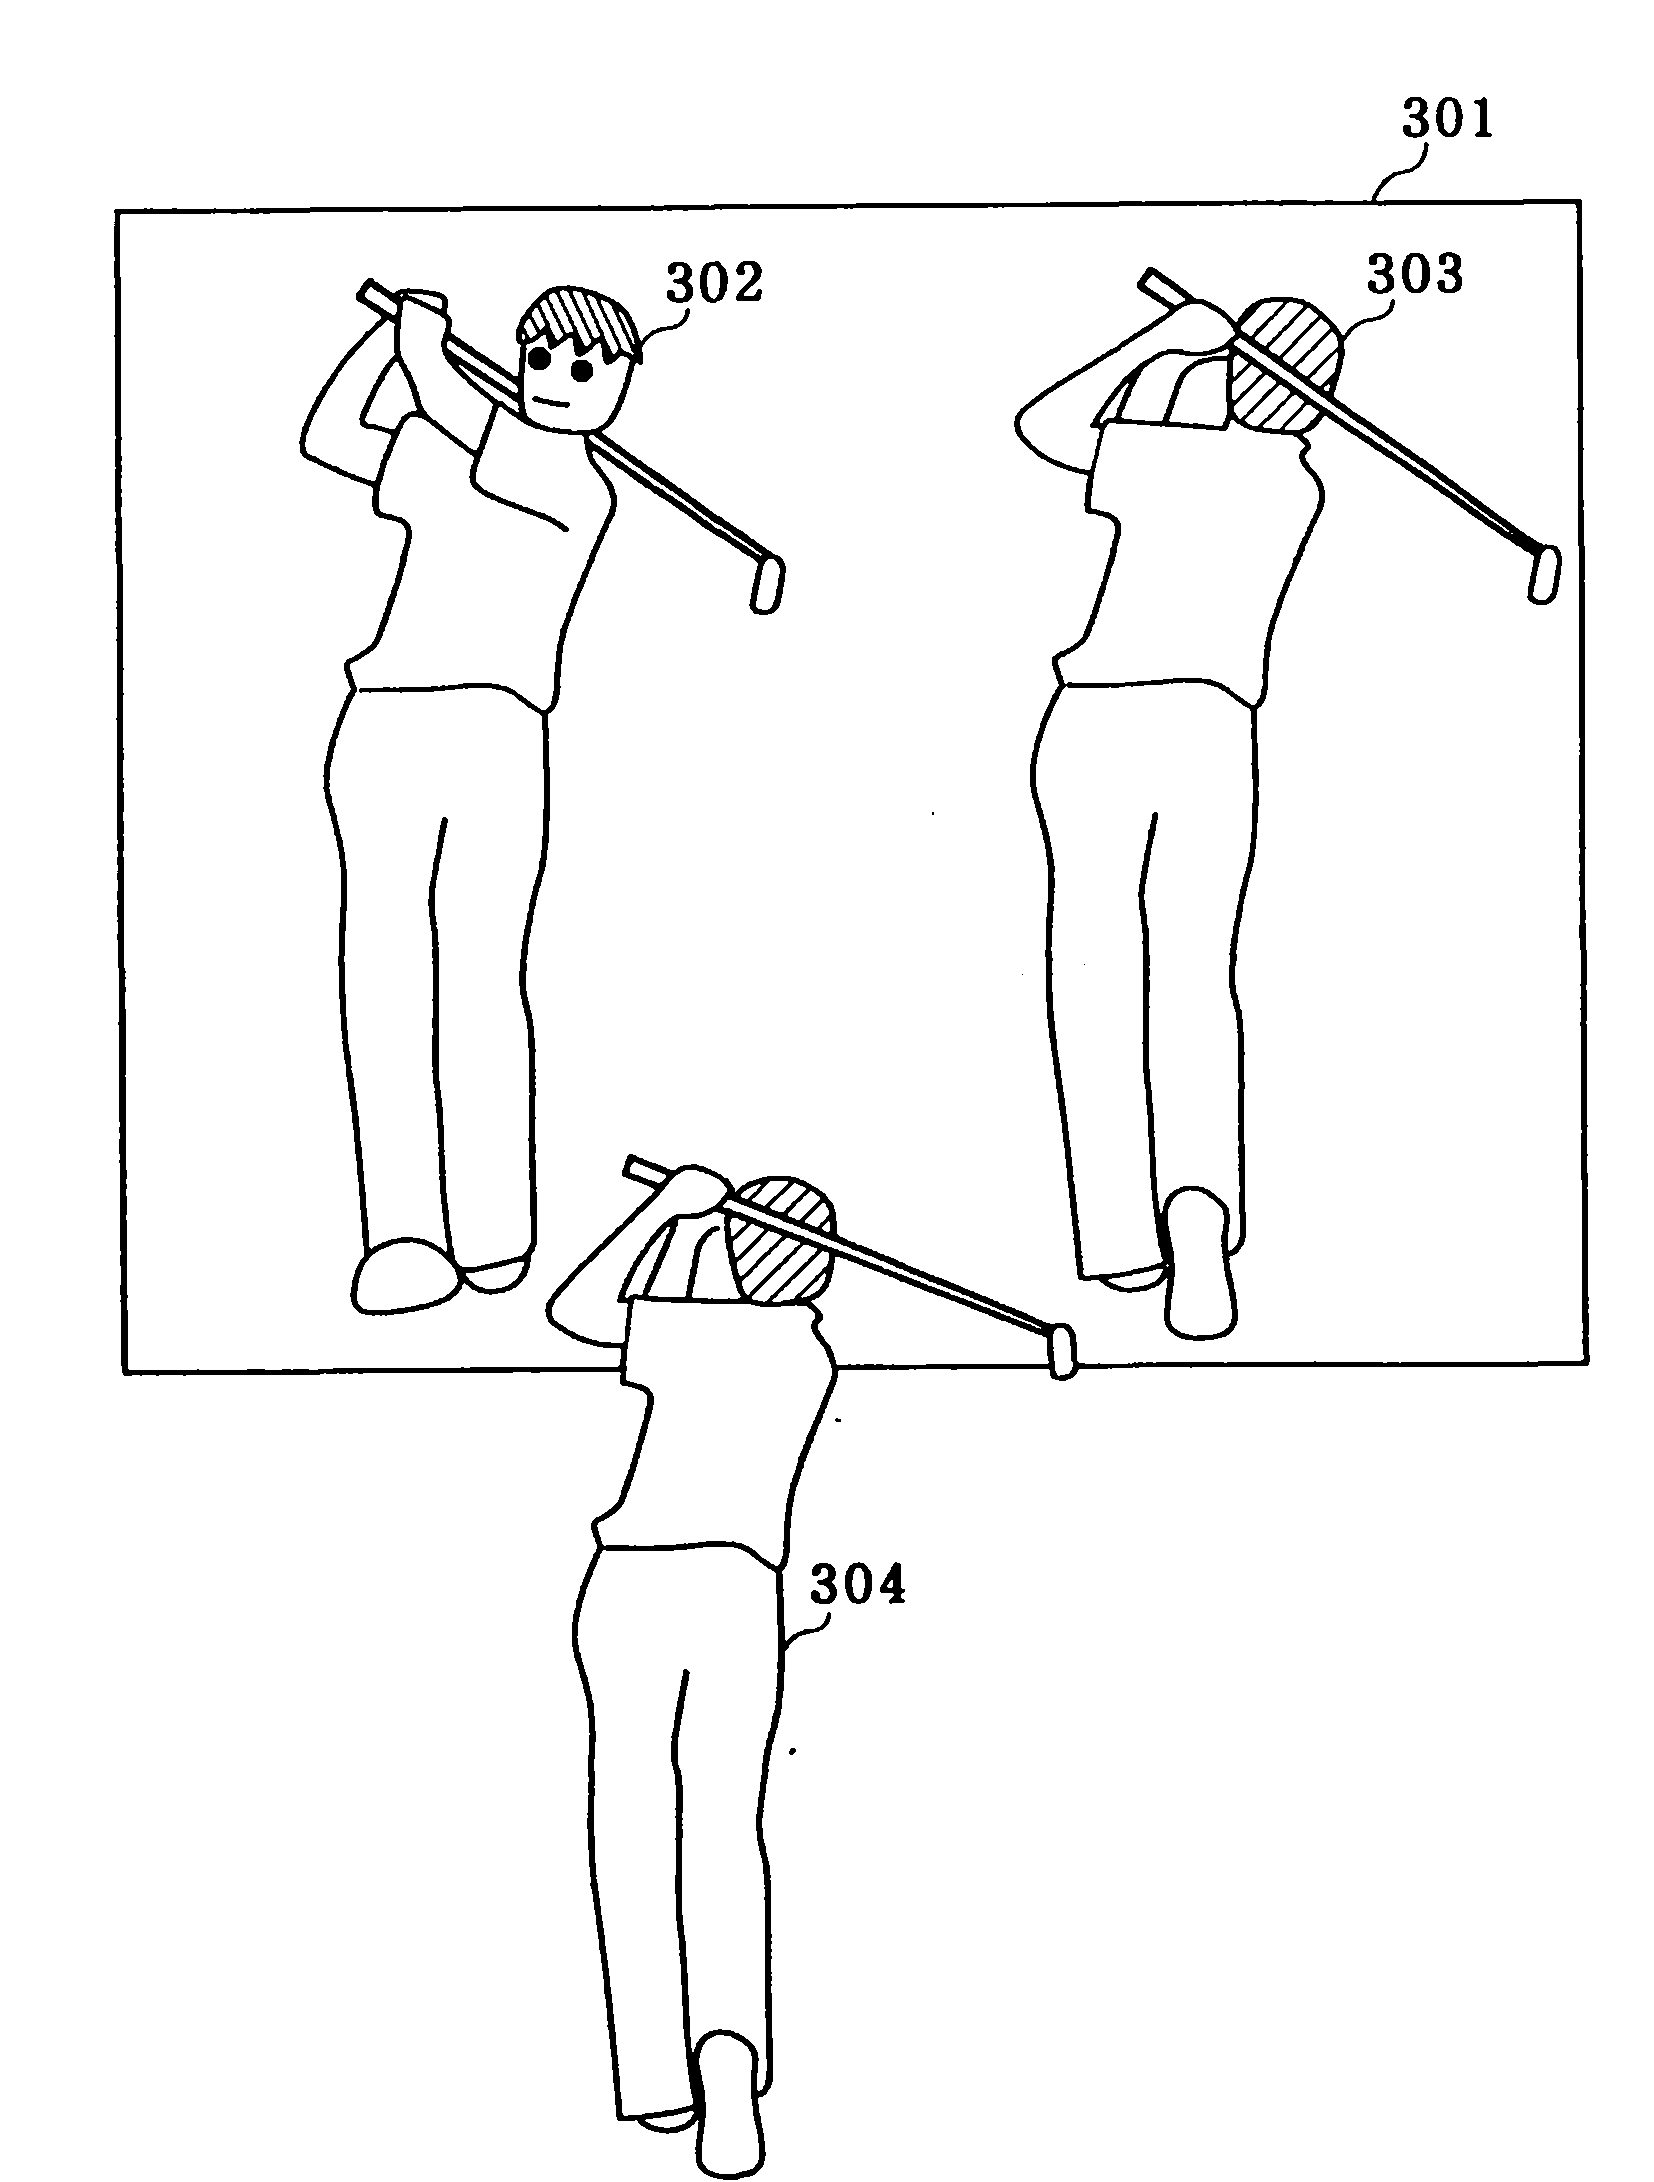 Electronic mirror device